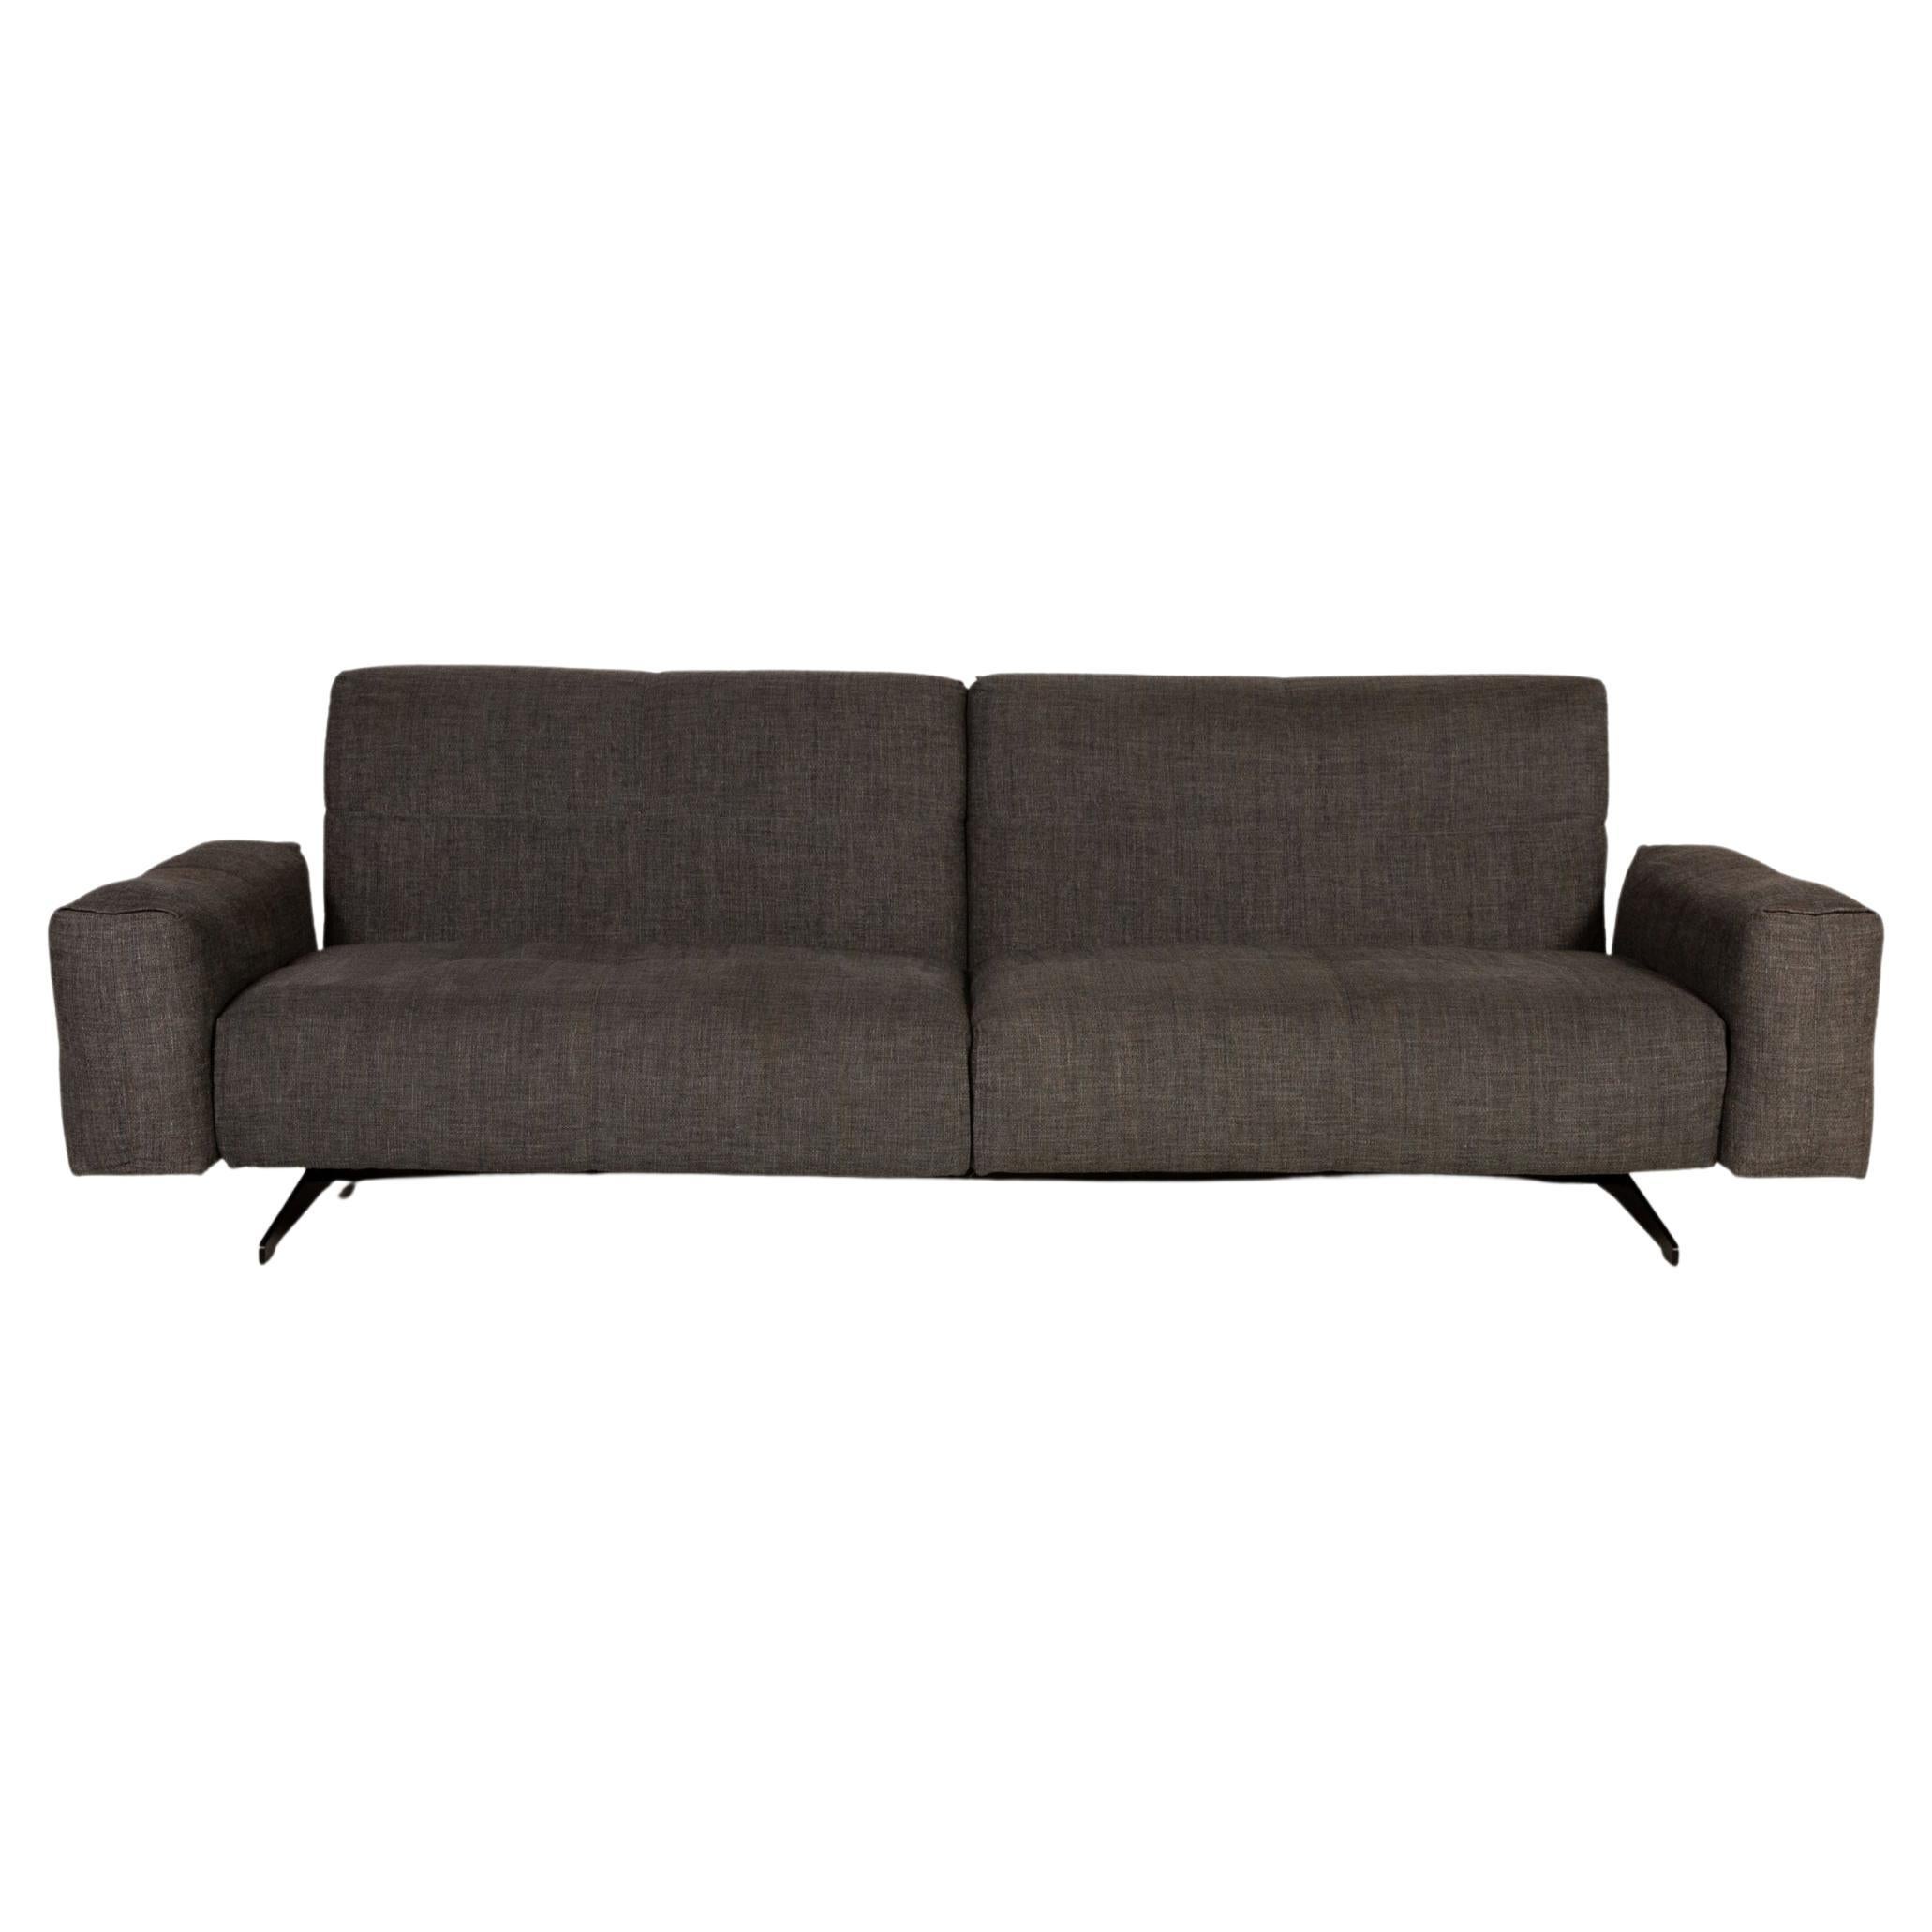 Rolf Benz 50 Fabric Sofa Gray Four-Seater Couch Relaxation Function For Sale